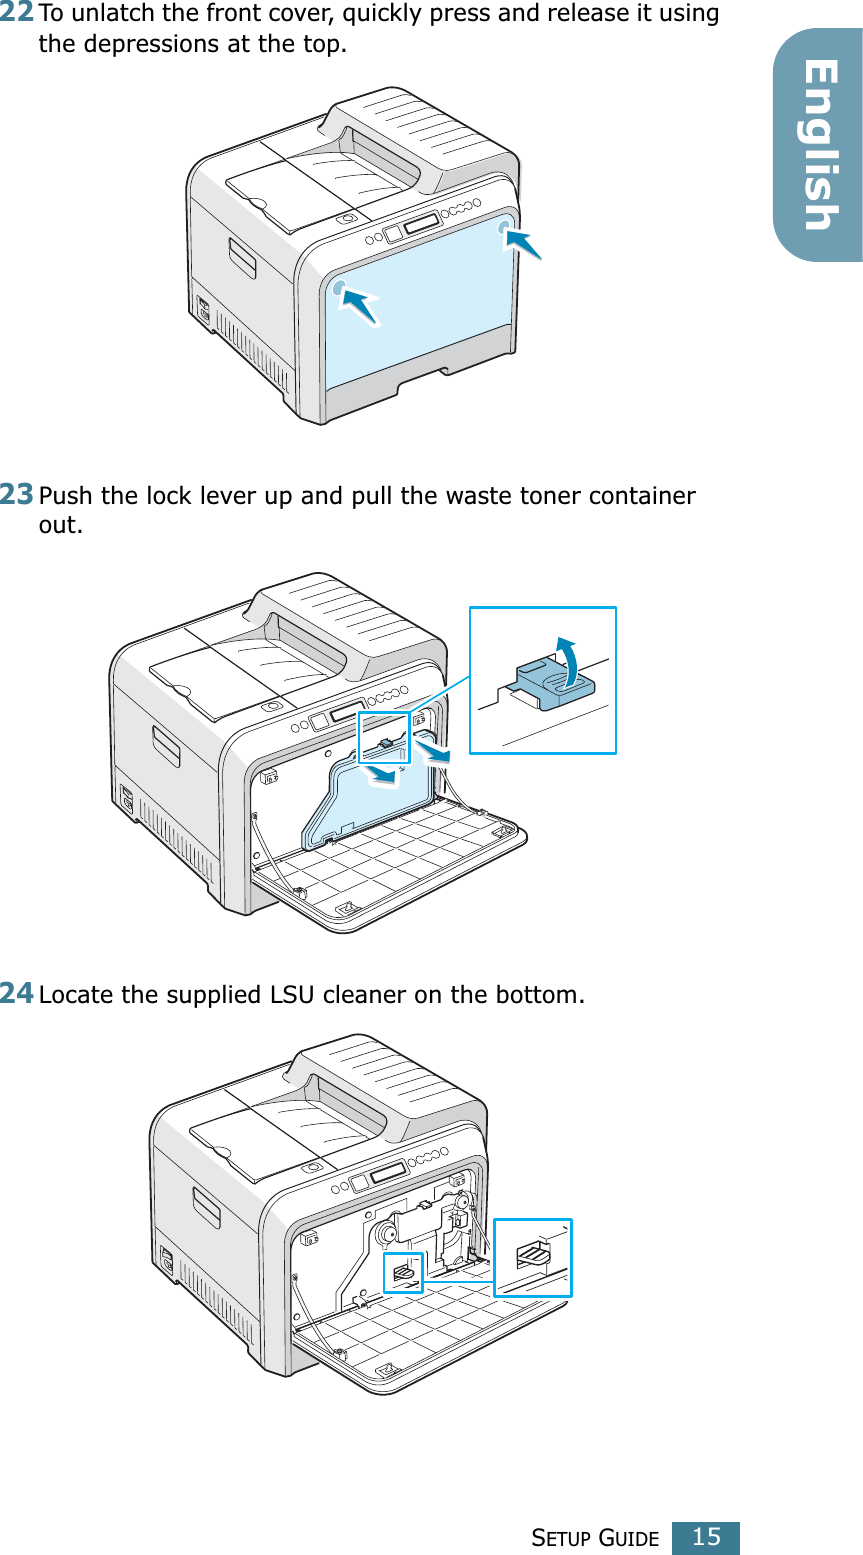 SETUP GUIDE15English22To unlatch the front cover, quickly press and release it using the depressions at the top.23Push the lock lever up and pull the waste toner container out.24Locate the supplied LSU cleaner on the bottom.